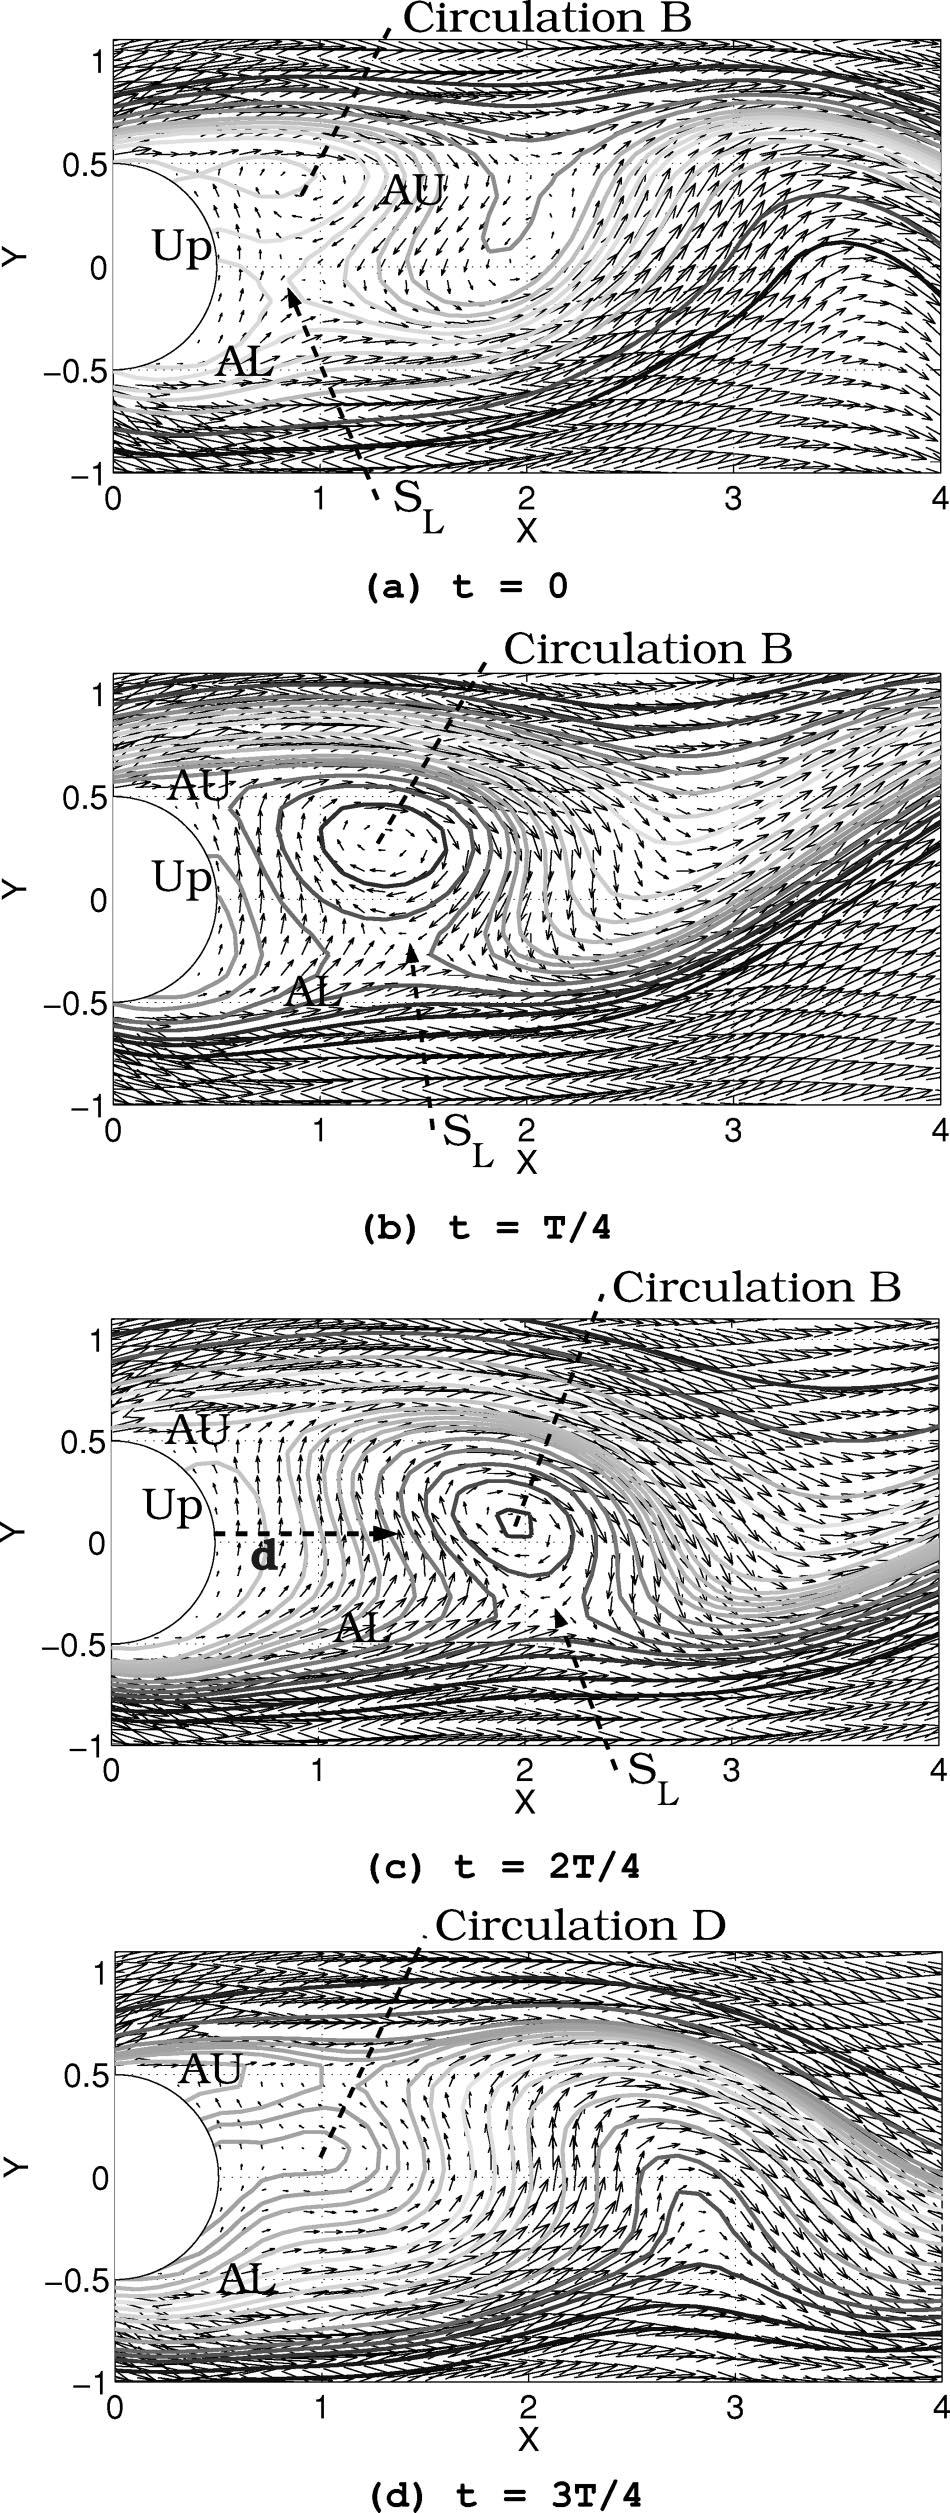 Phys. Fluids, Vol. 16, No. 8, August 2004 Experimental and numerical investigation of the vortex 3111 FIG. 14. Calculated isotemperature lines at an in-plume position at Re 85 and Ri 1.0. Numbers indicate temperature values.